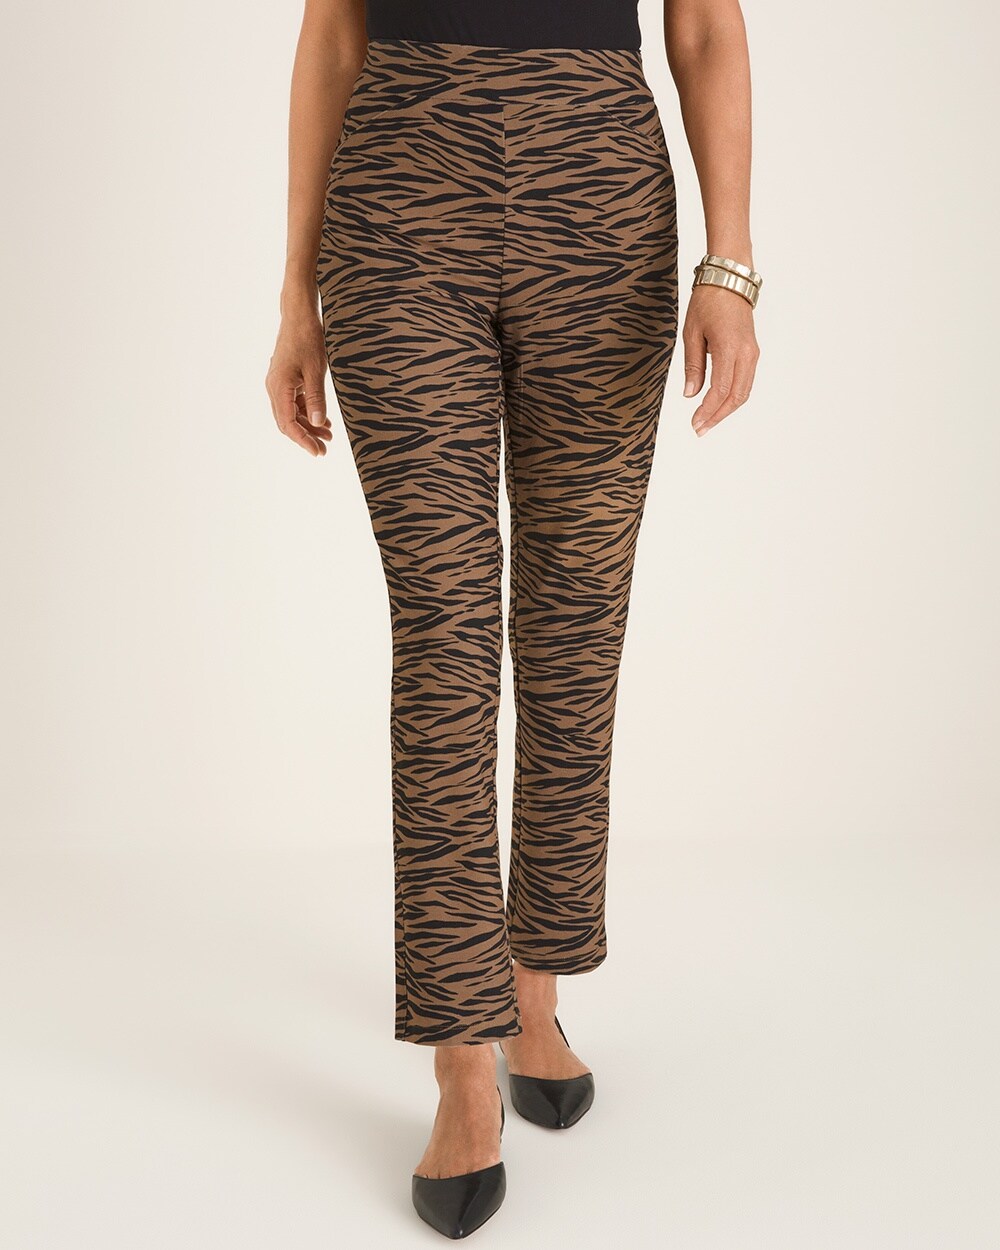 Travelers Collection Zebra-Print Crepe Ankle Pants